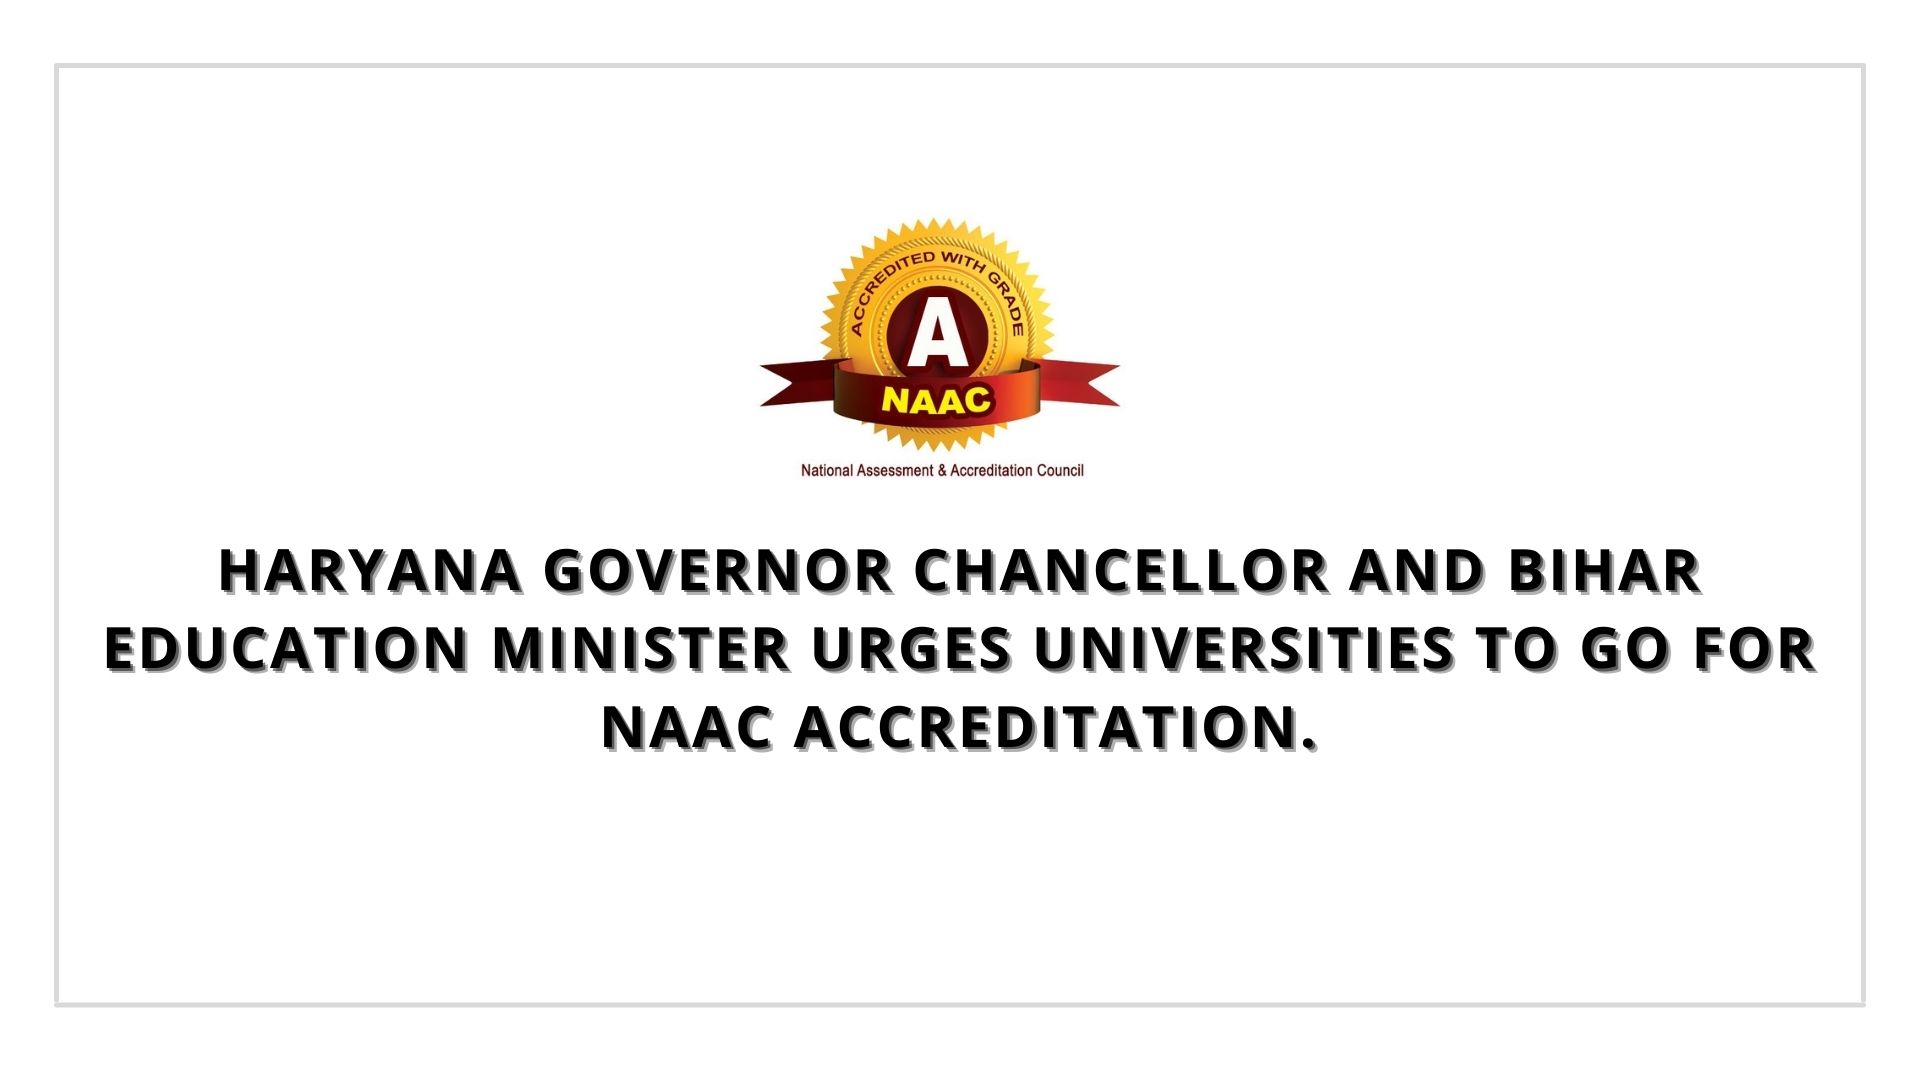 Haryana Governor Chancellor and Bihar Education Minister urges universities to go for NAAC Accreditation.